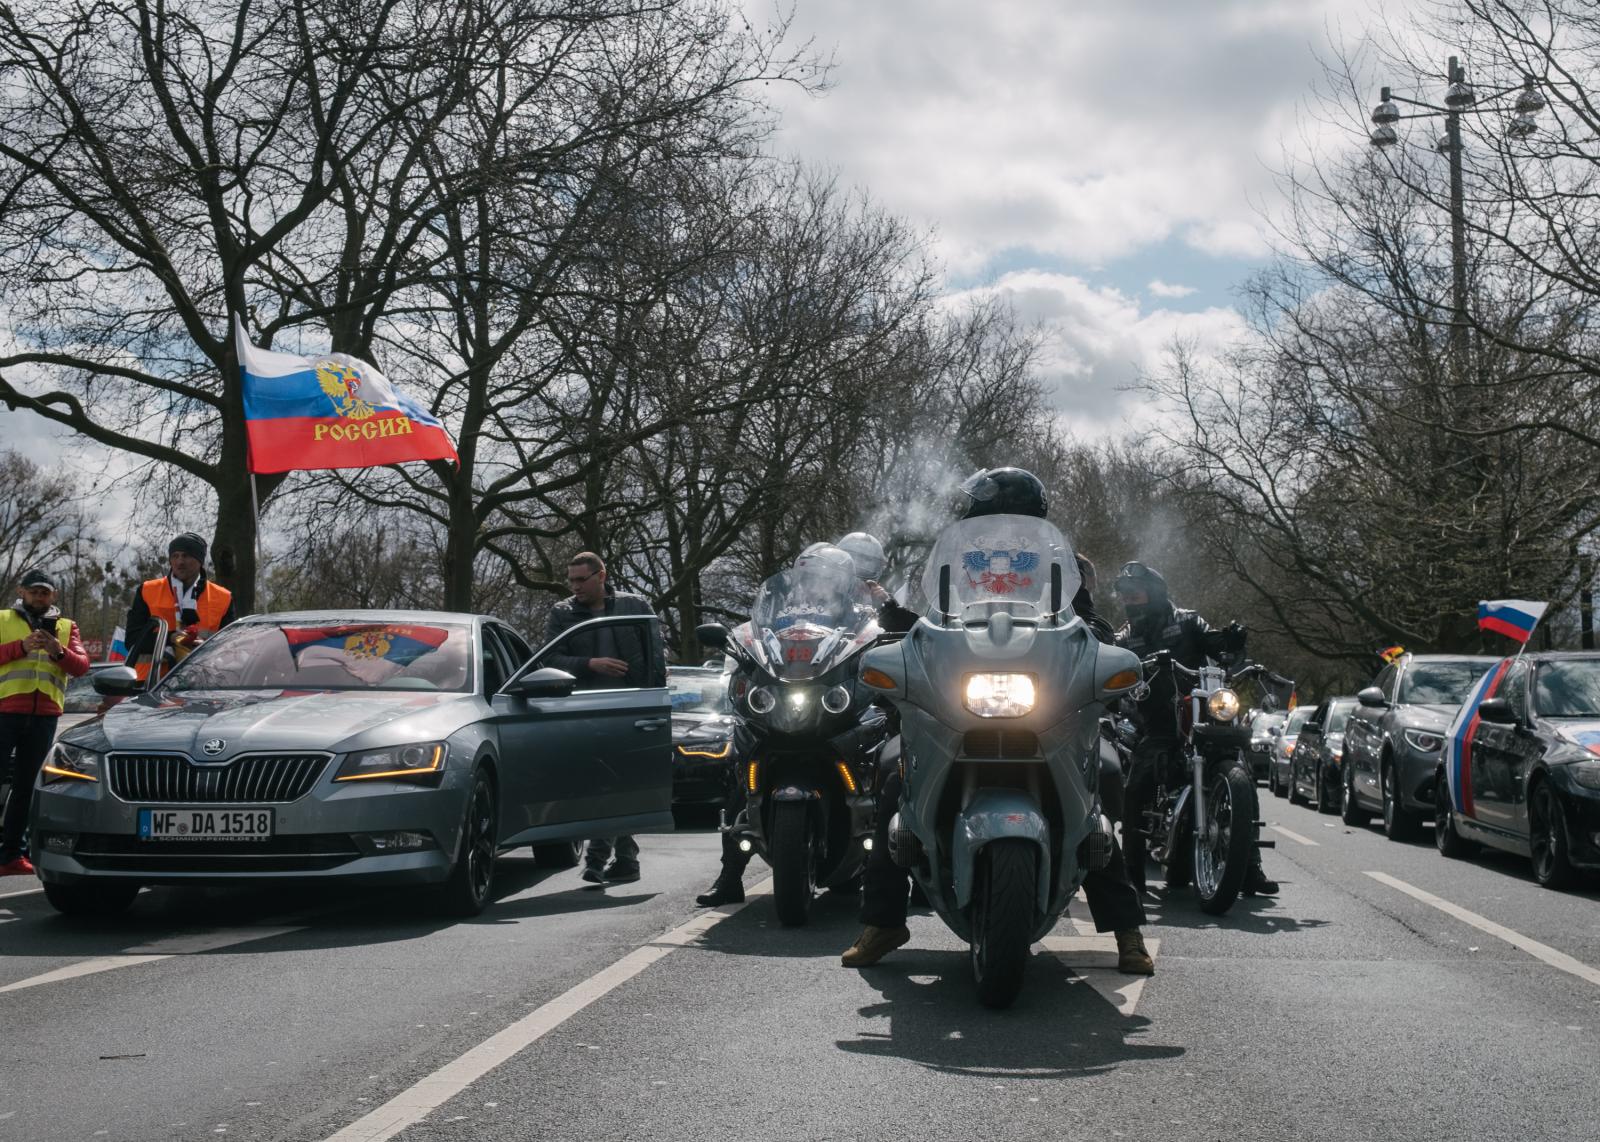 Russian Motorcade in Hanover Blocked - Bikers associated with the "night wolves" line...